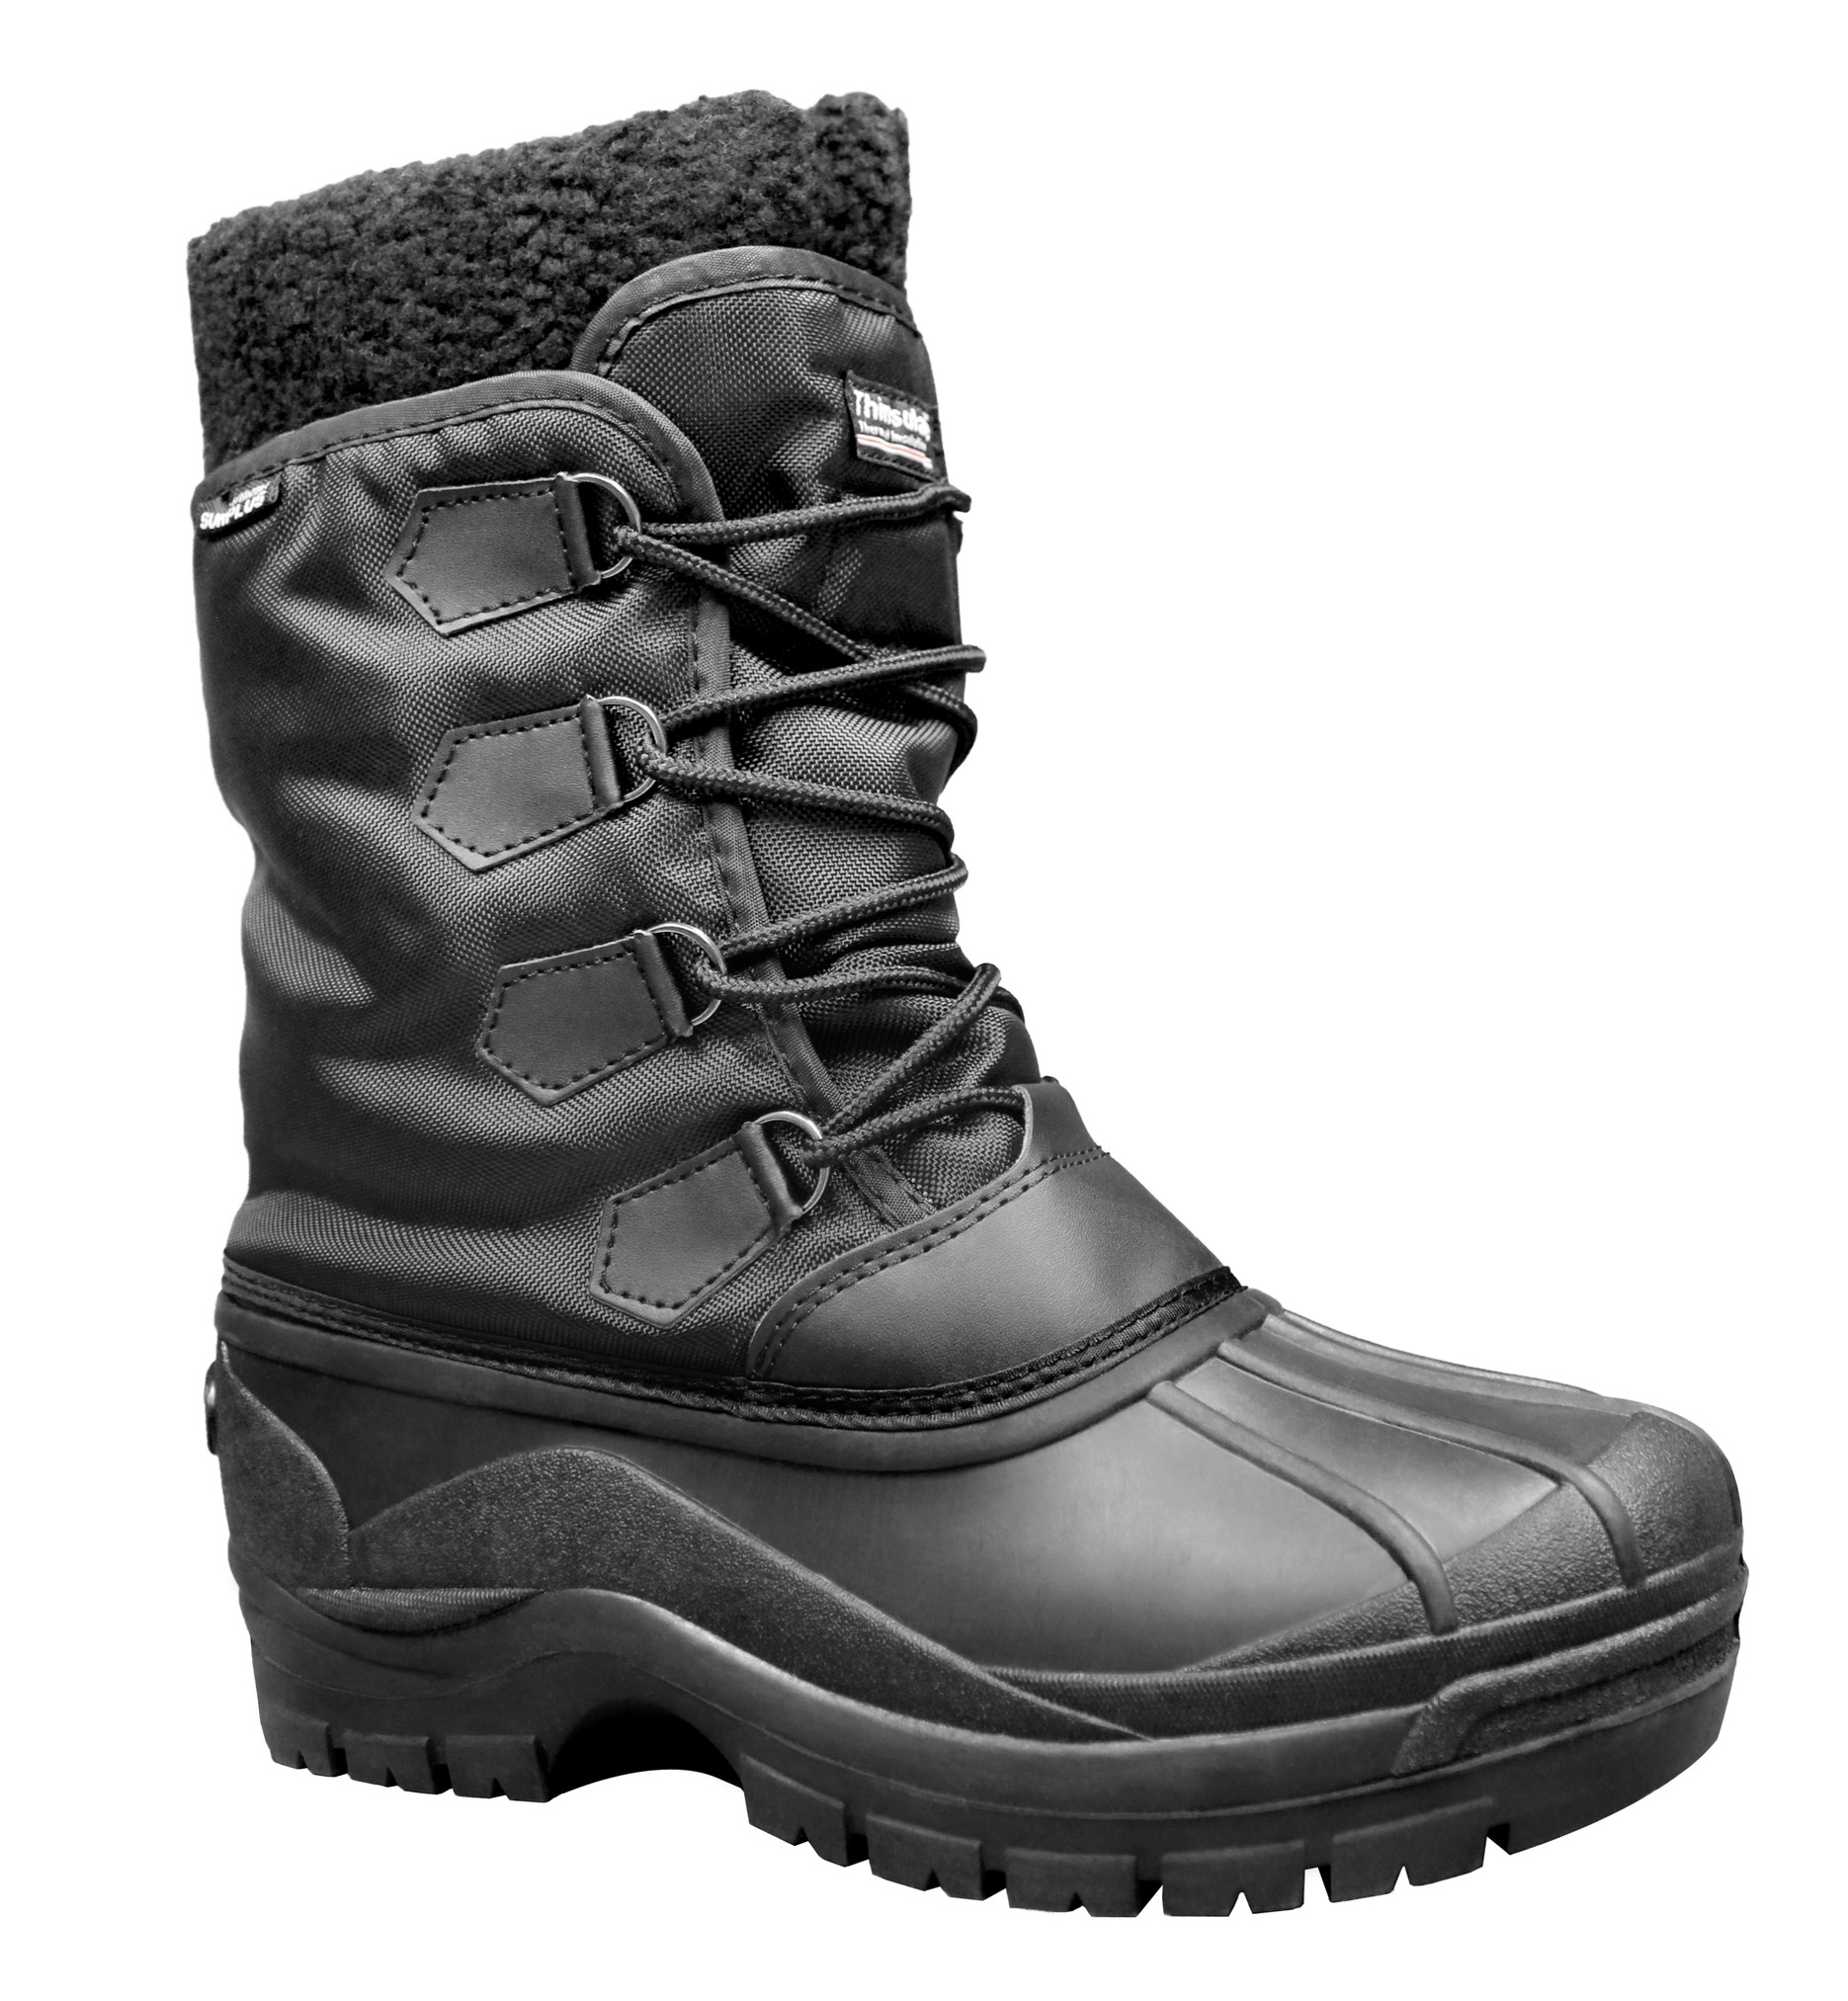 Thermal Snow Boots